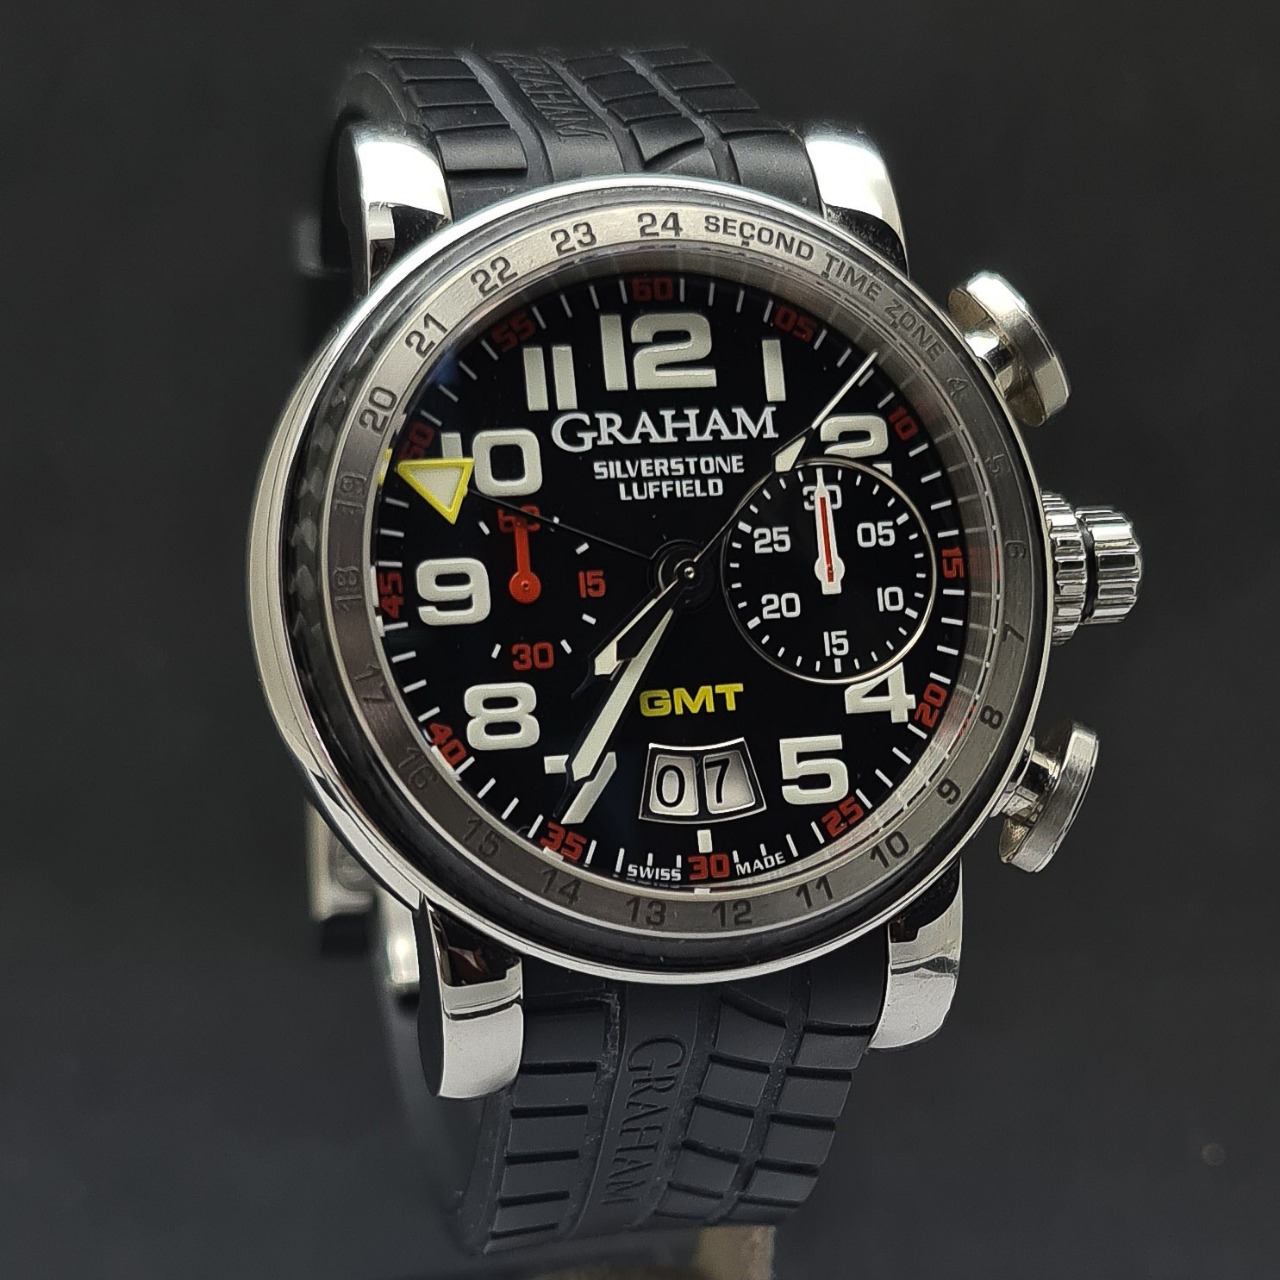 GRAHAM SILVERSTONE LIMITED EDITION